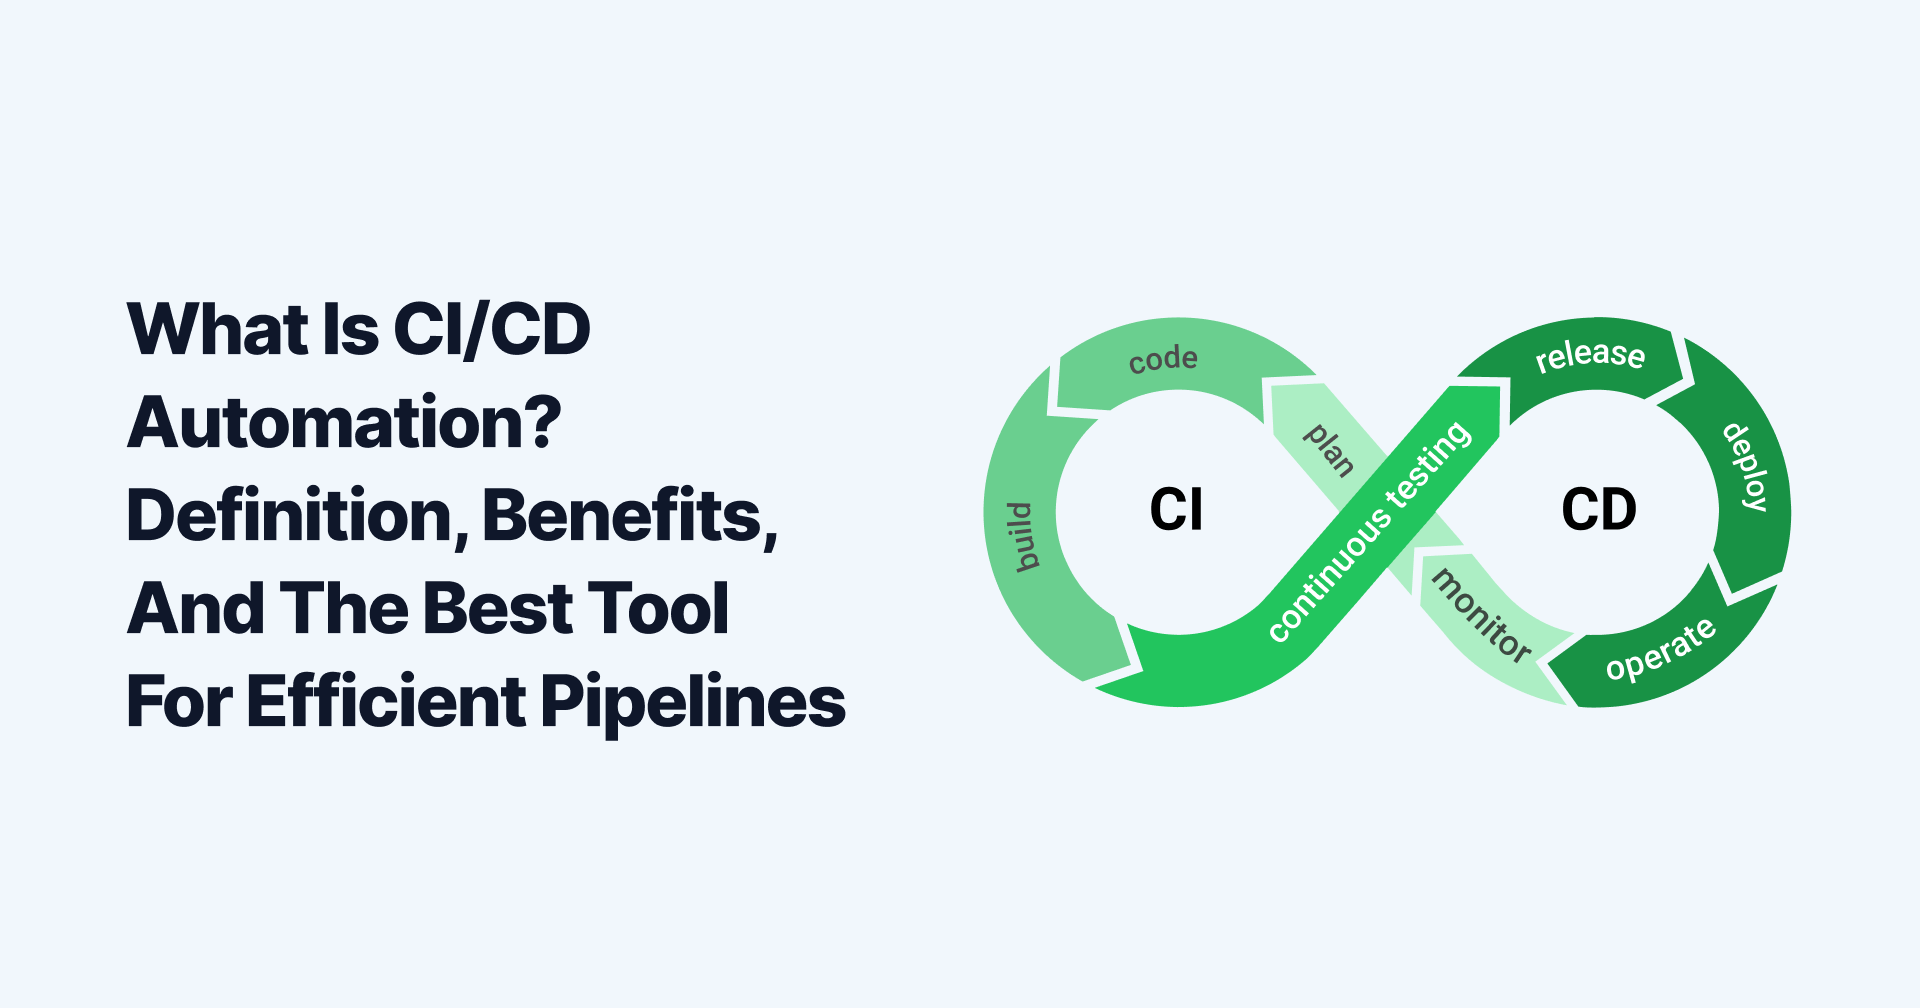 What Is CI/CD Automation? Definition, Benefits, And The Best Tool For Efficient Pipelines